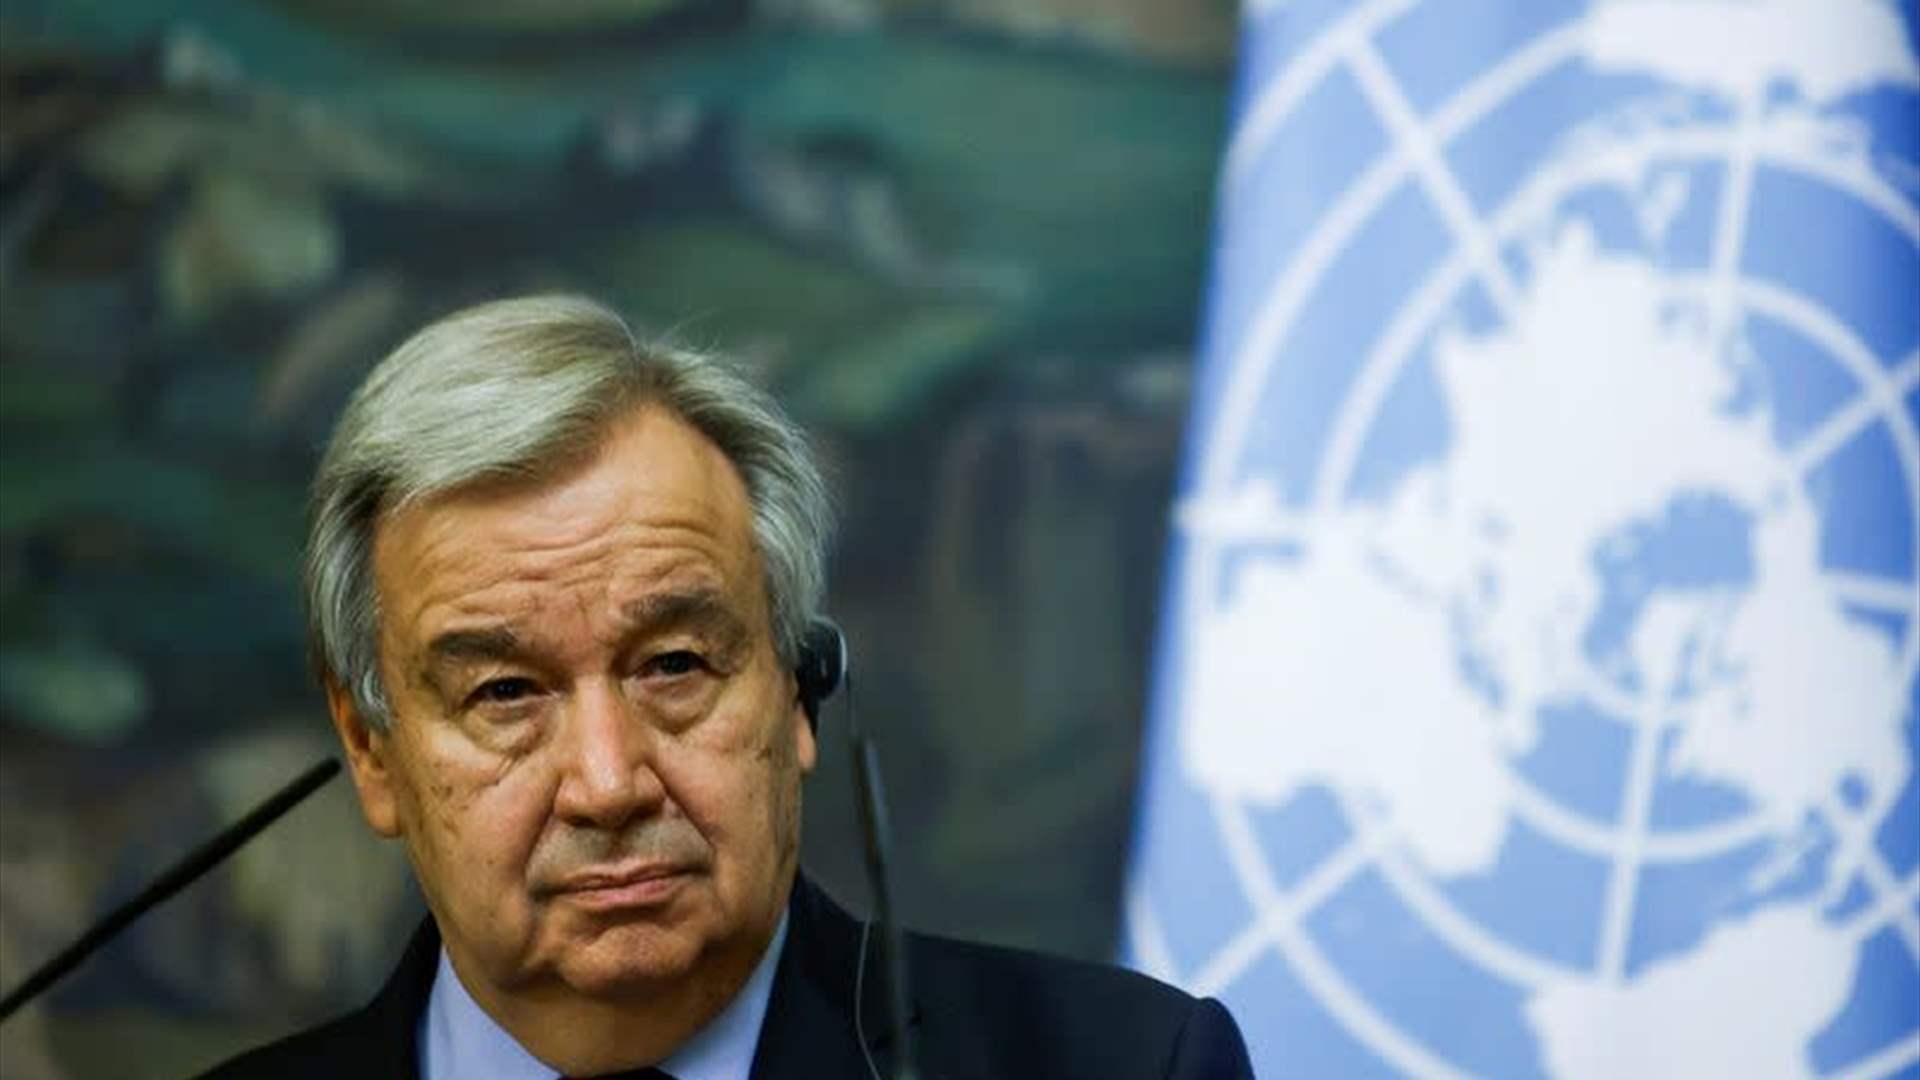 UN chief arrives in Haiti for &#39;solidarity&#39; visit: official